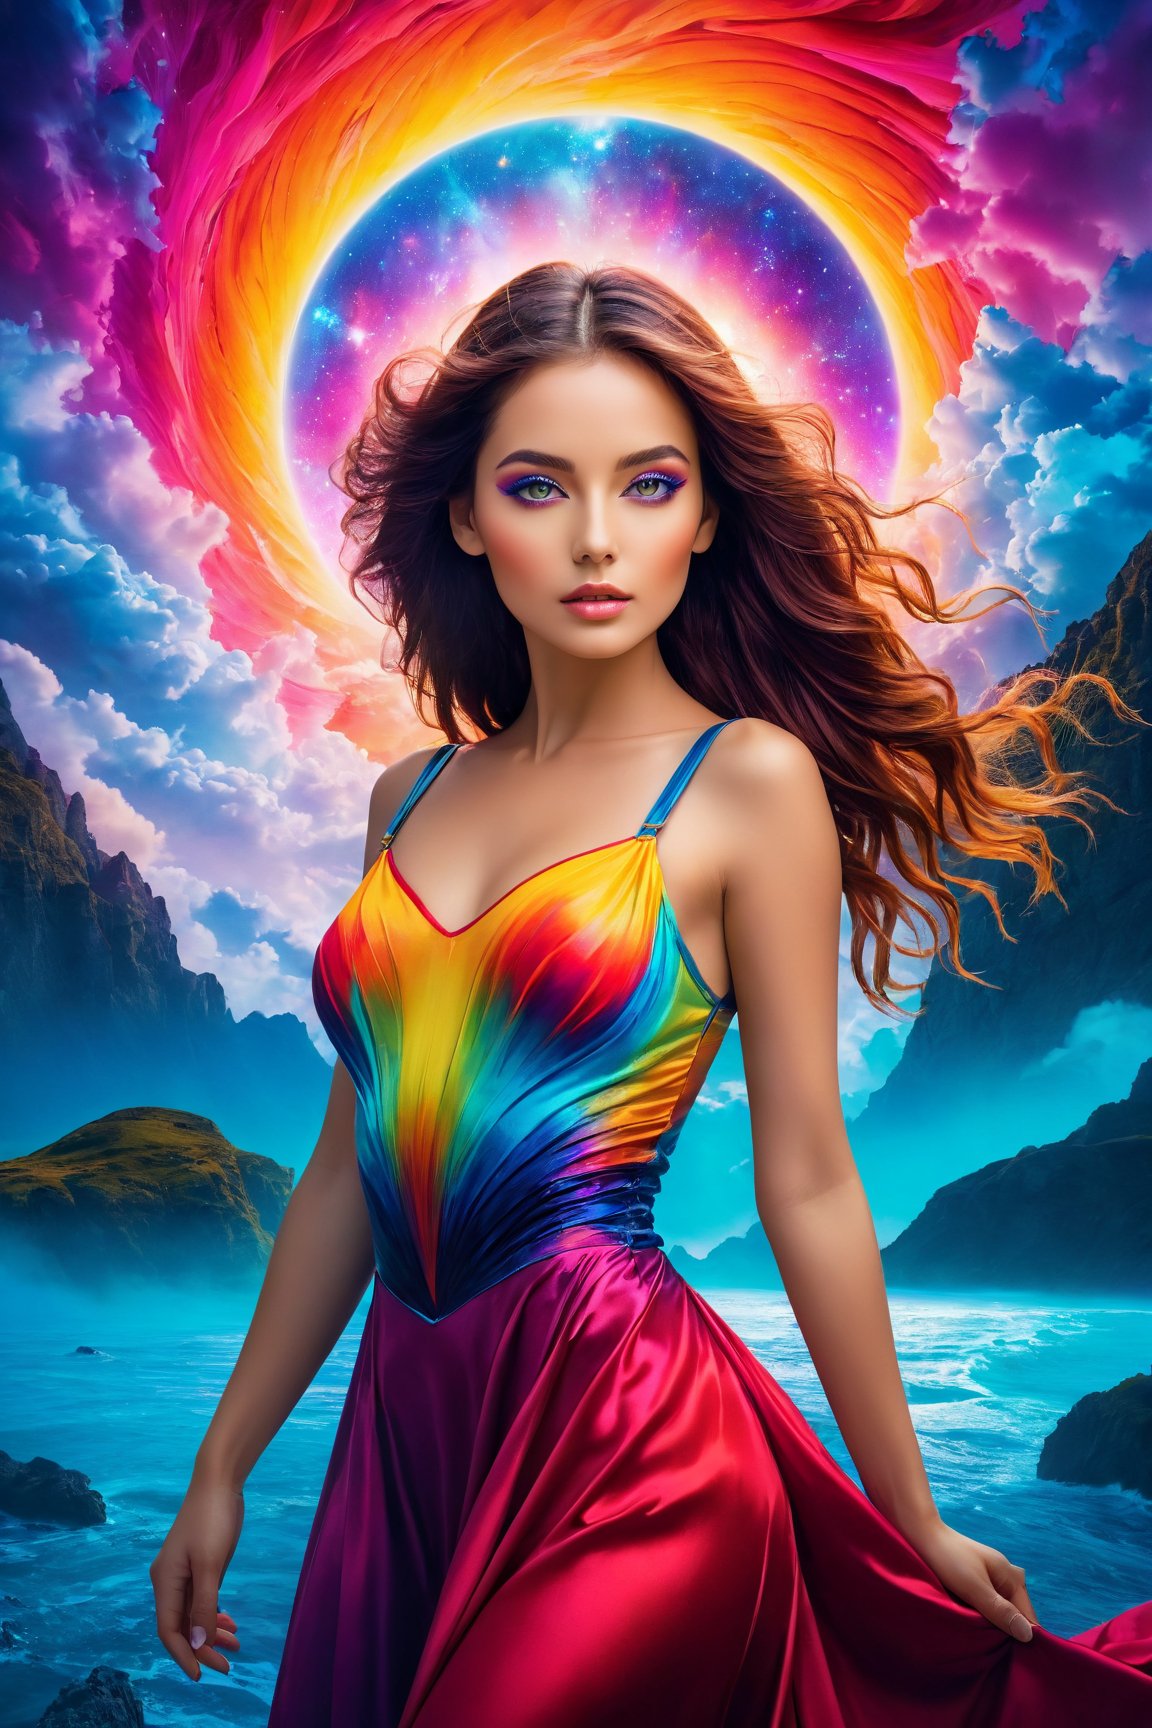 (photography:1.2), (vibrant and surreal:1.3), An extraordinary 8K photograph that transports a woman into a surreal, dreamlike world of vibrant colors and dramatic lighting. She stands amidst a fantastical, ethereal landscape that complements her finely detailed features, including her captivating eyes and flawless skin. The background is an otherworldly canvas of vivid, magical hues, creating a visually stunning and photorealistic masterpiece that merges the beauty of the subject with a surreal and vibrant environment.